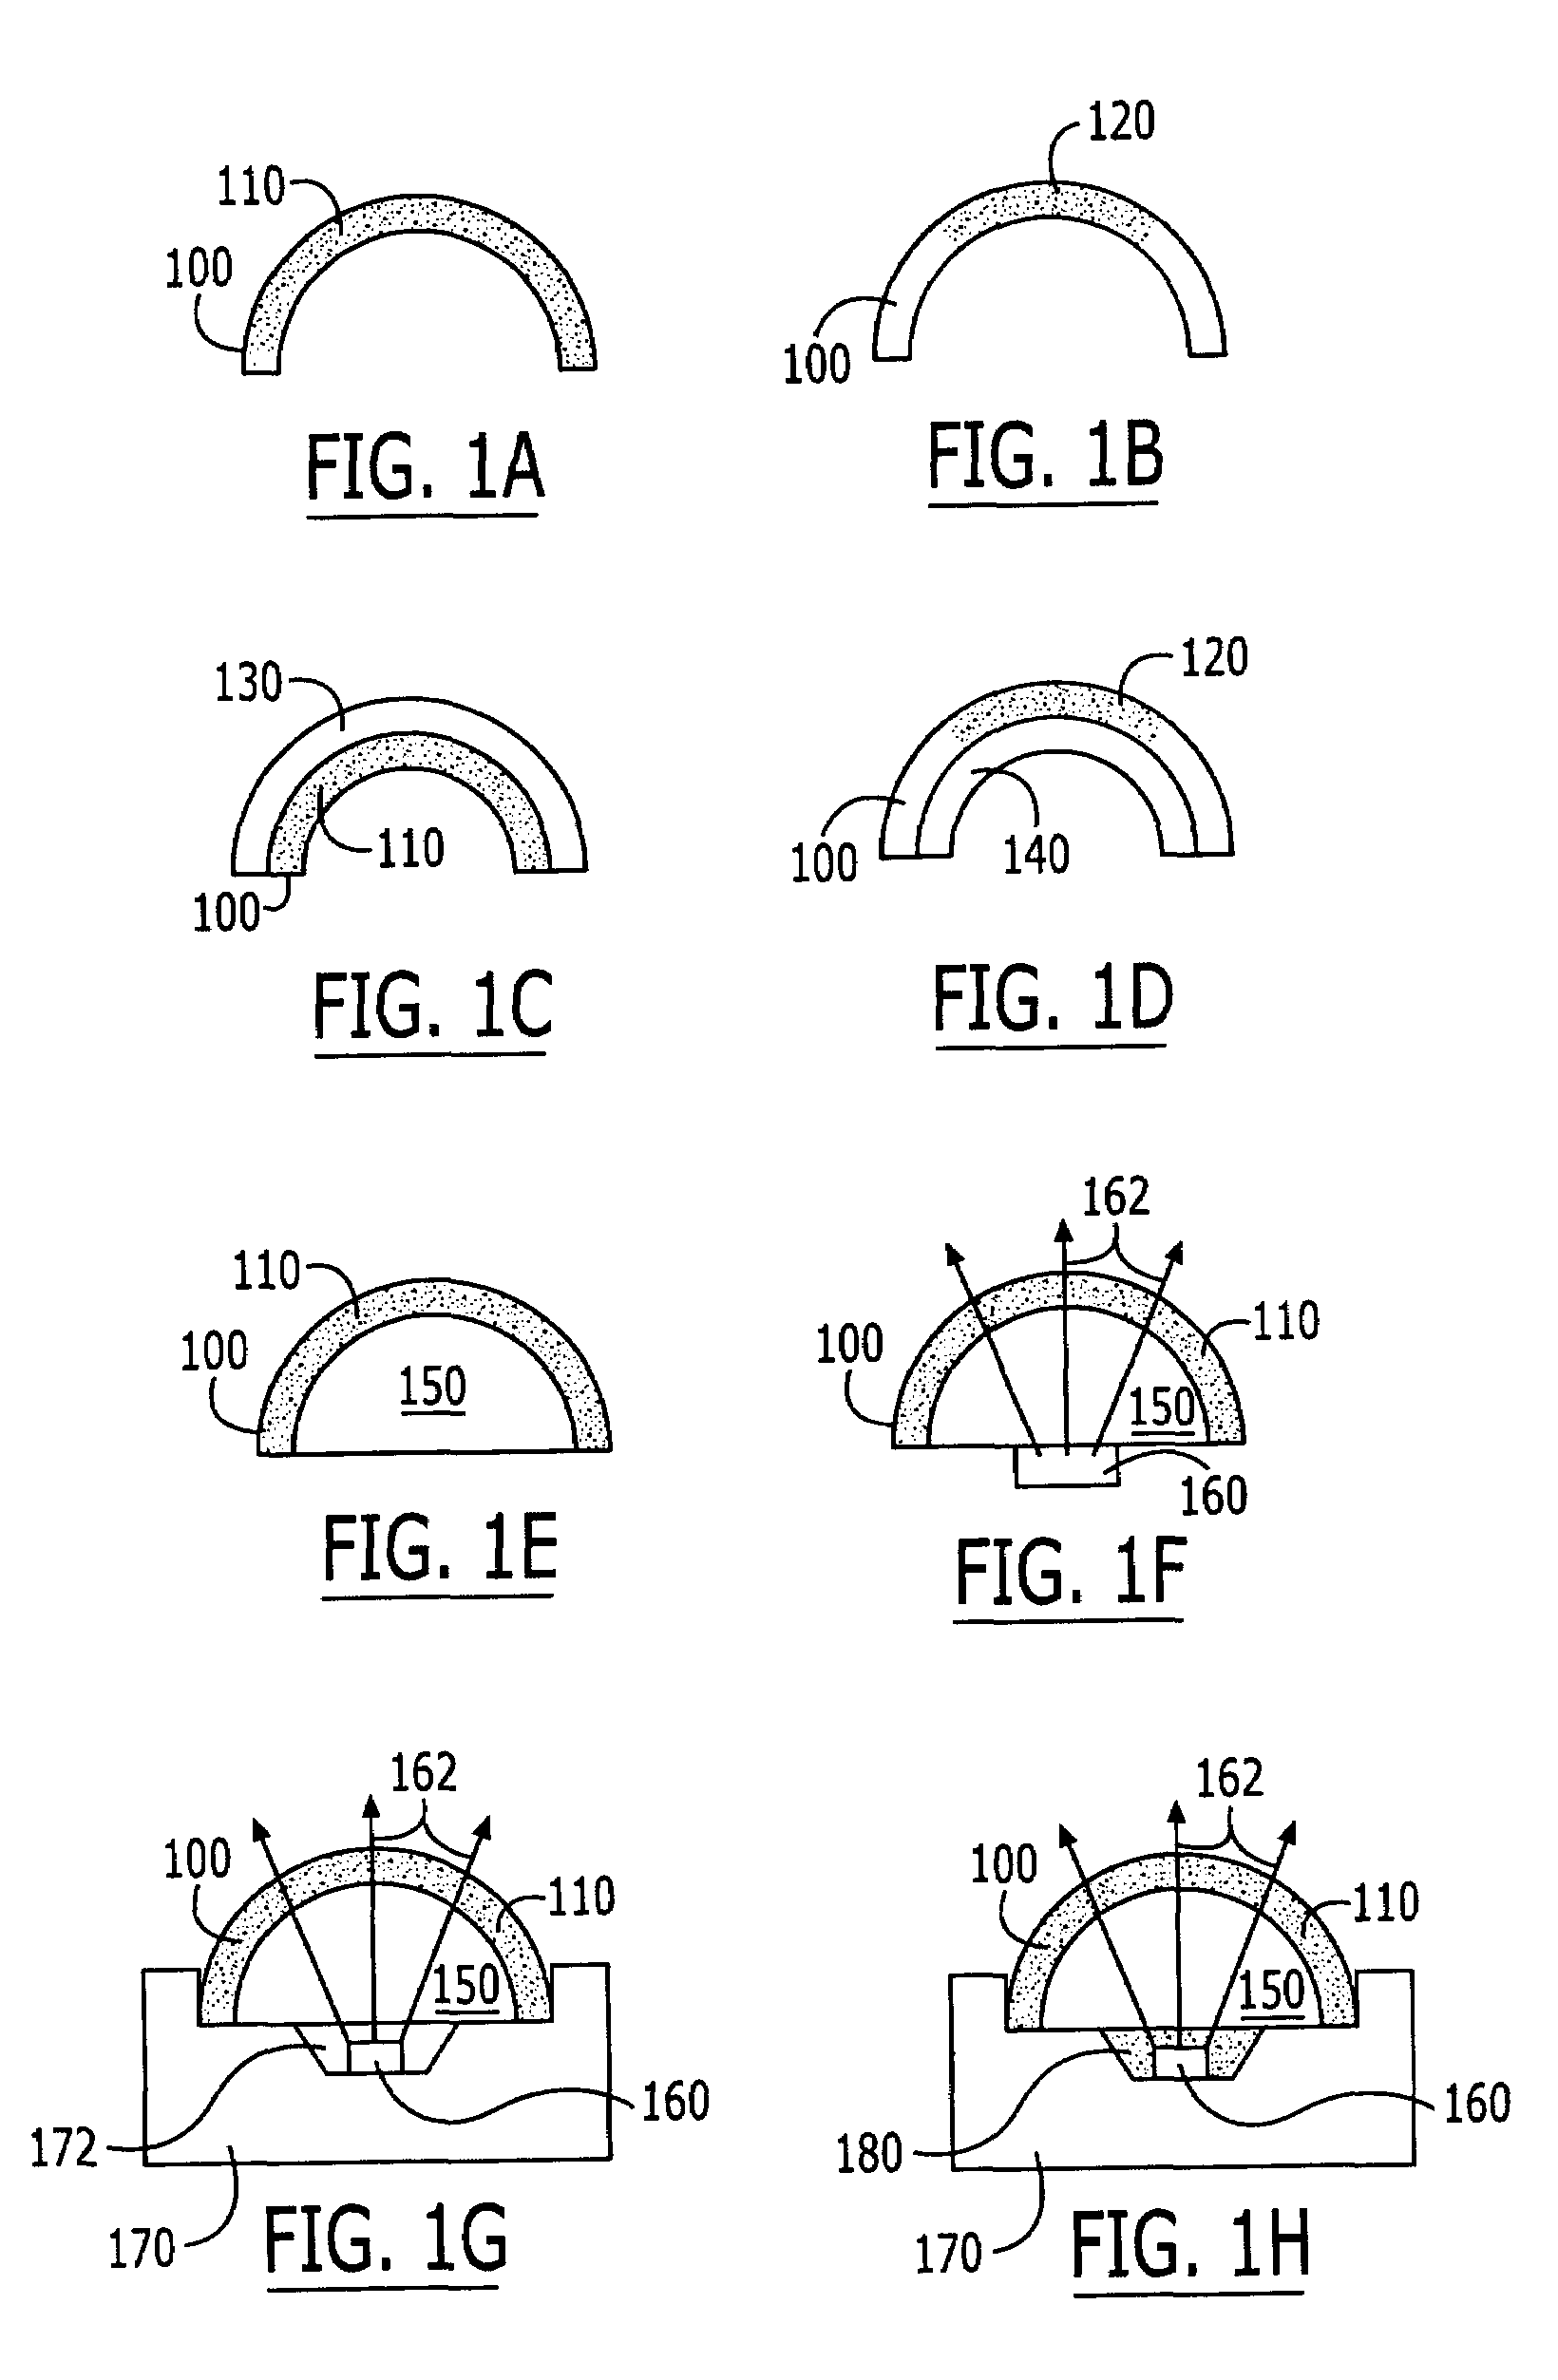 Transmissive optical elements including transparent plastic shell having a phosphor dispersed therein, and methods of fabricating same